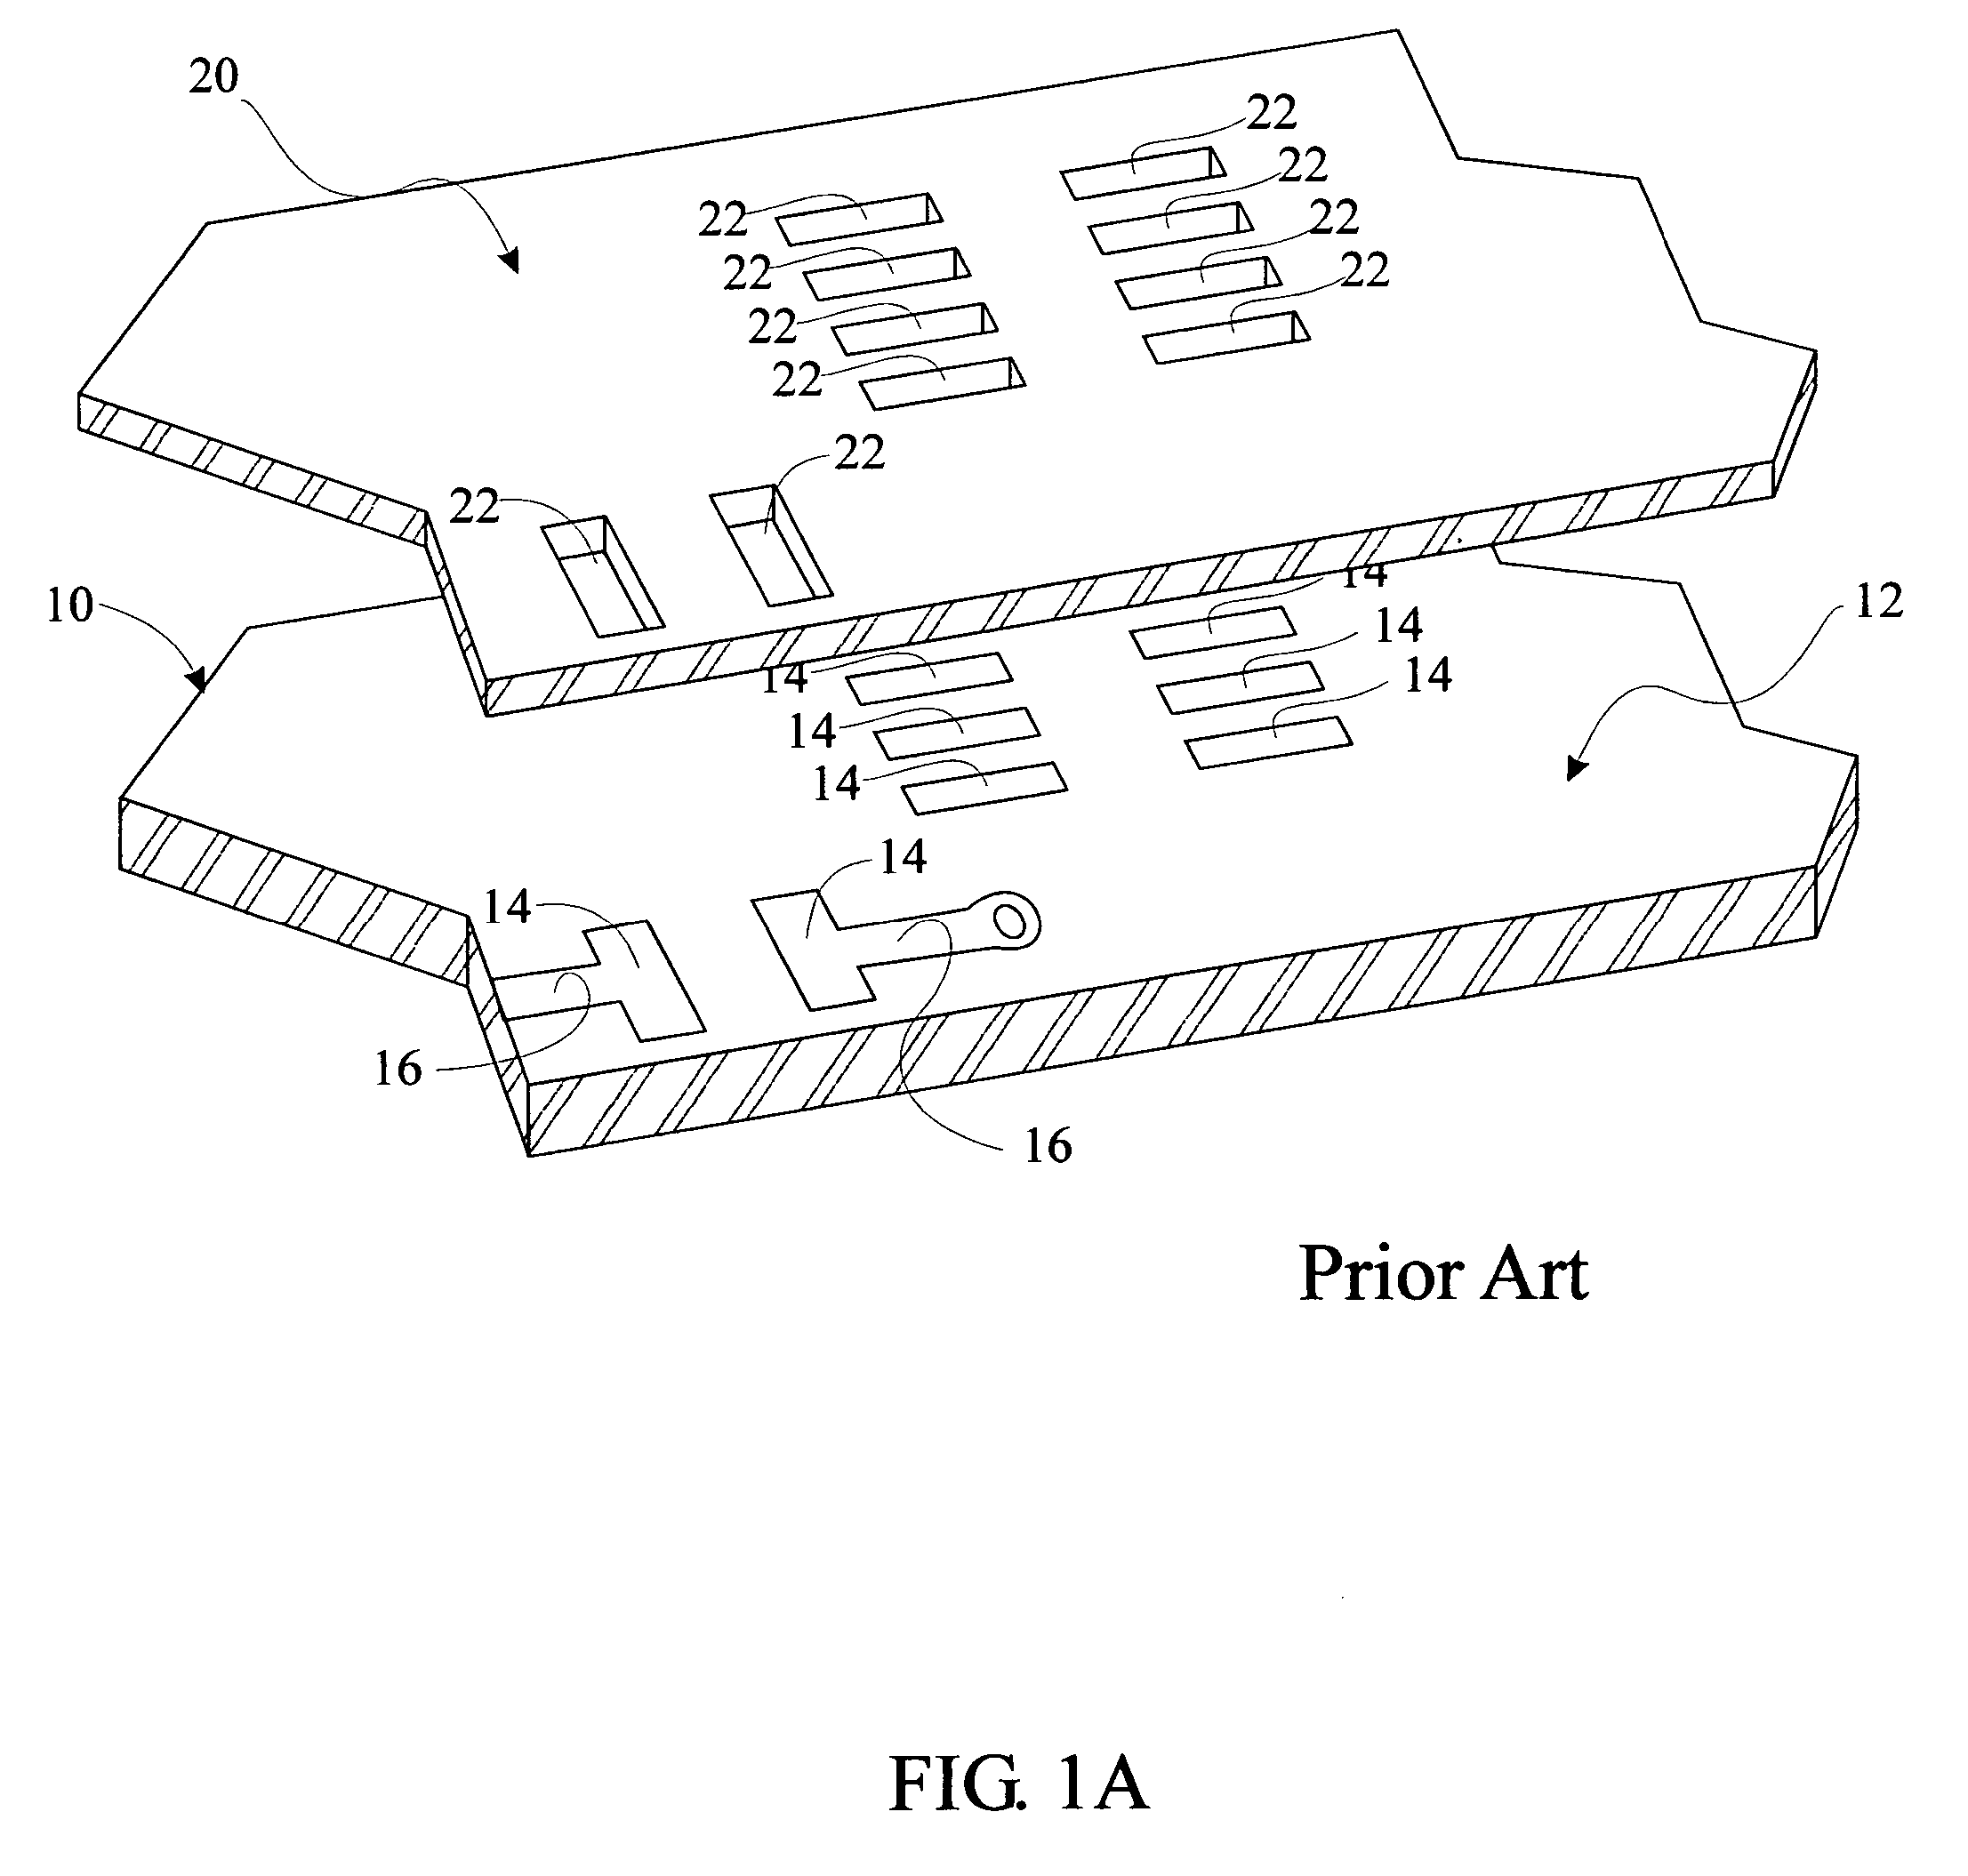 Application of acoustic and vibrational energy for fabricating bumped IC die and assembly of PCA's